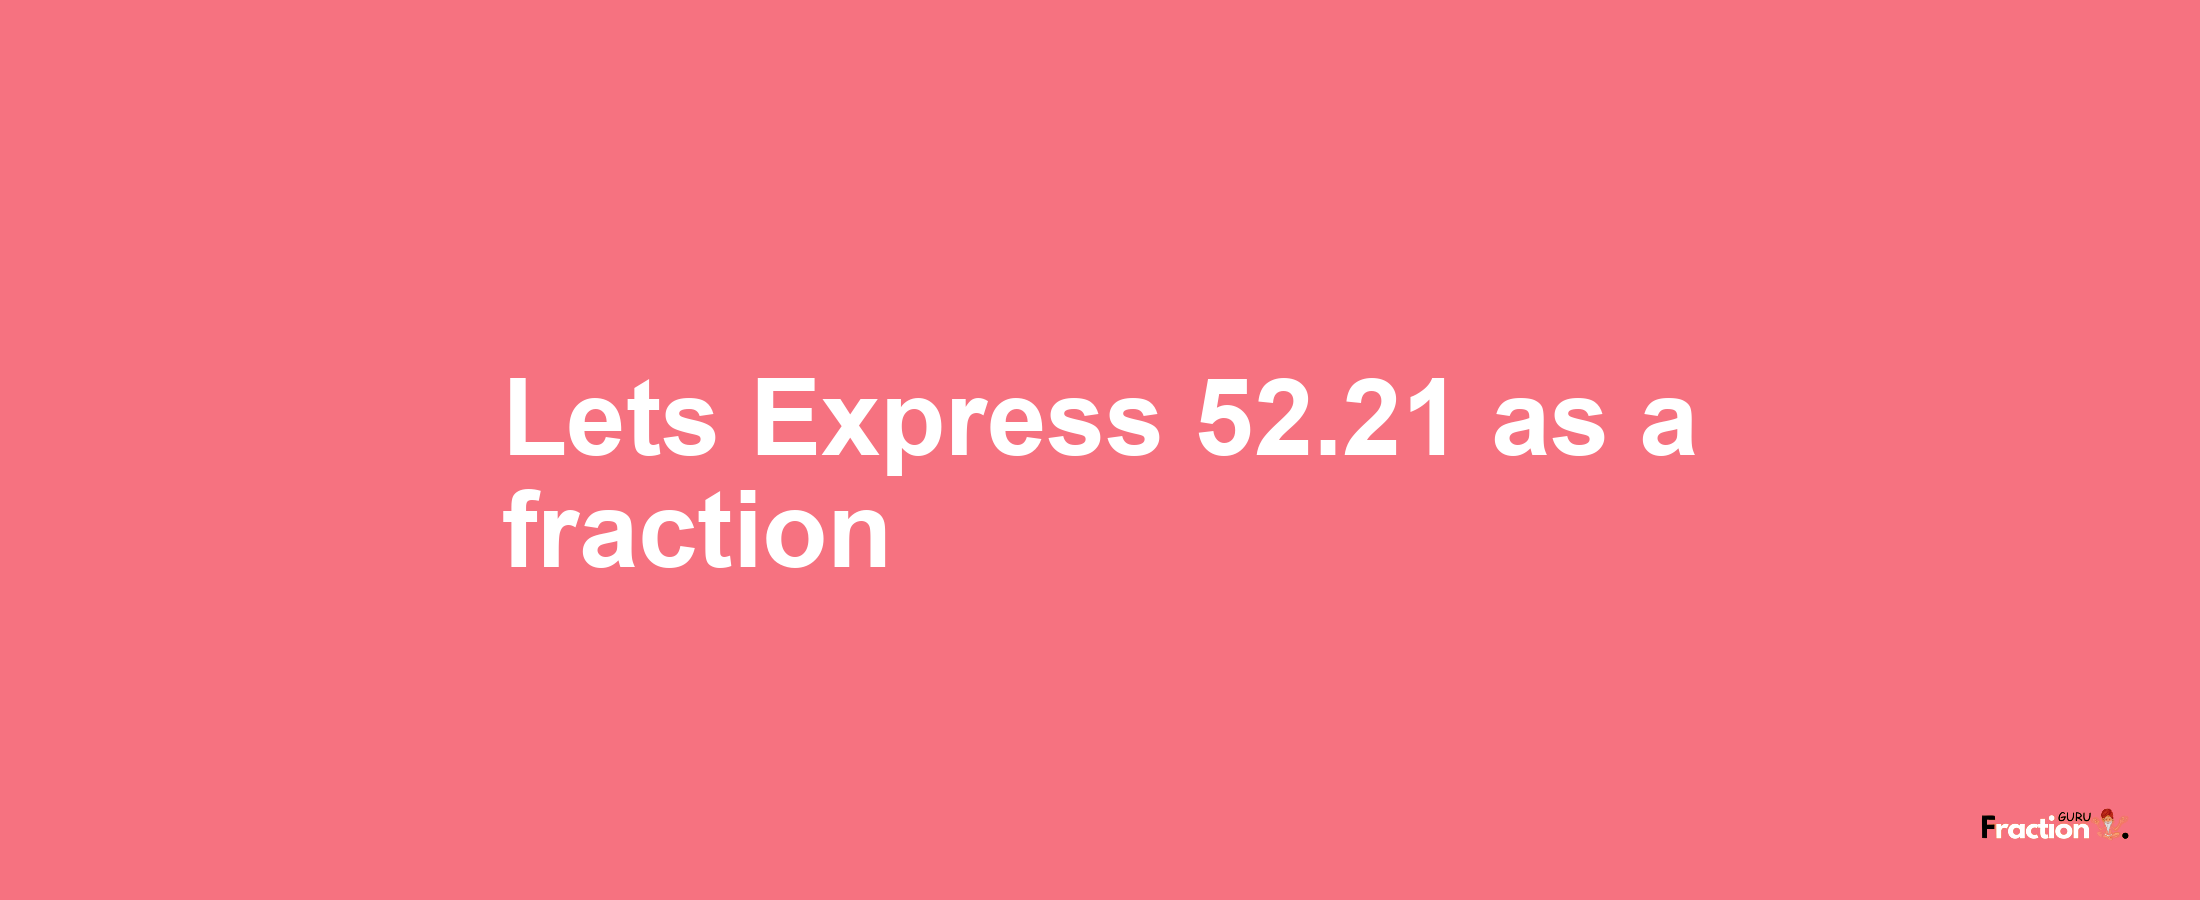 Lets Express 52.21 as afraction